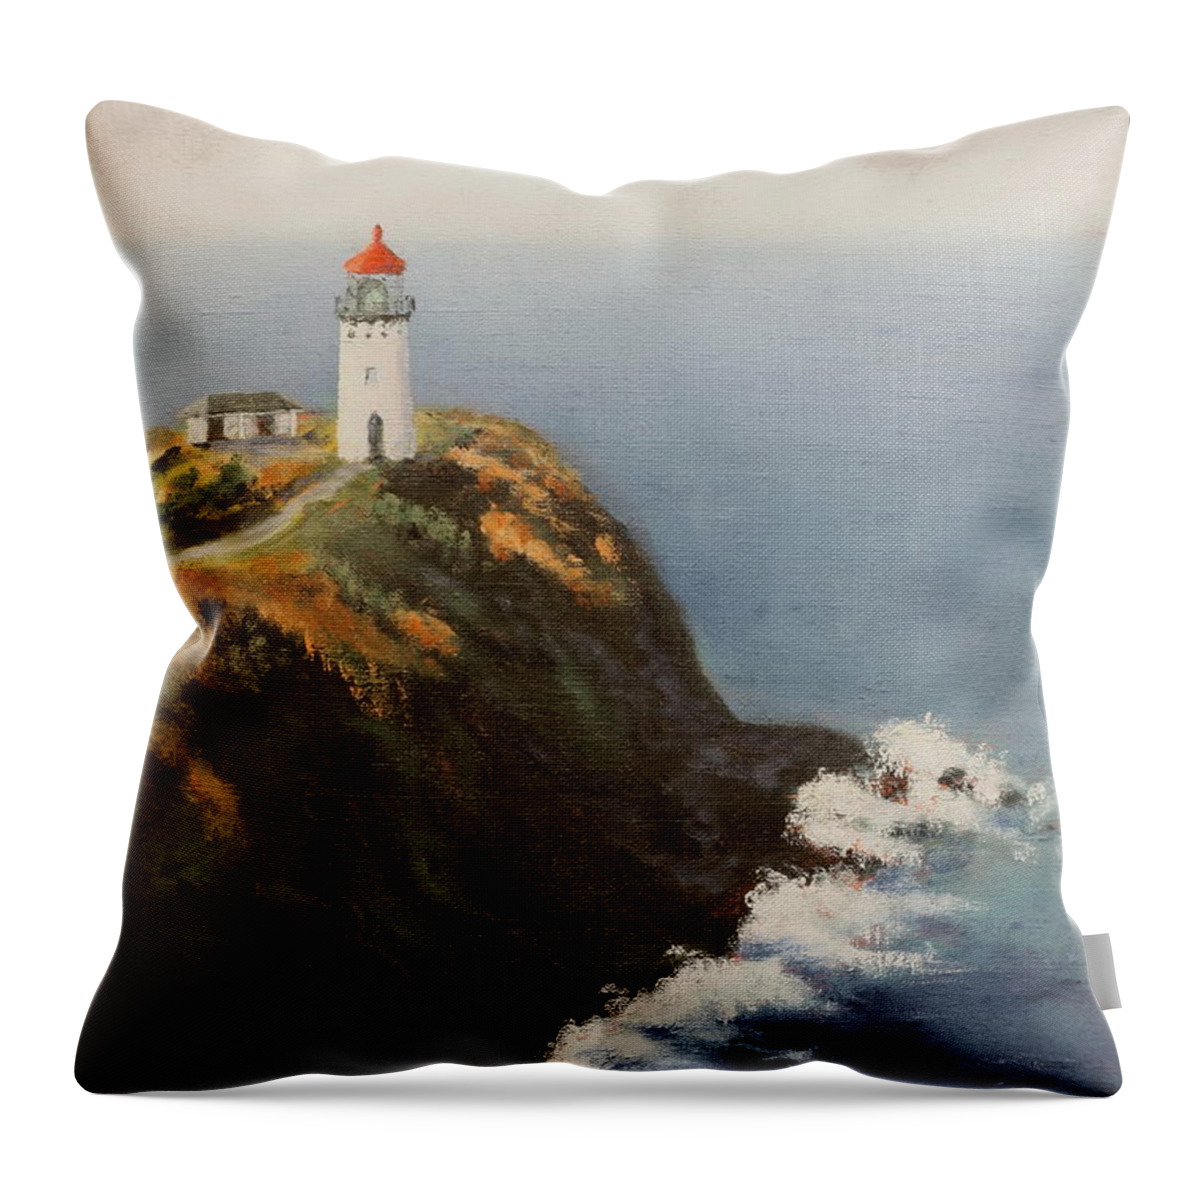 Painting Throw Pillow featuring the painting Kilauea Lighthouse by Alan Mager